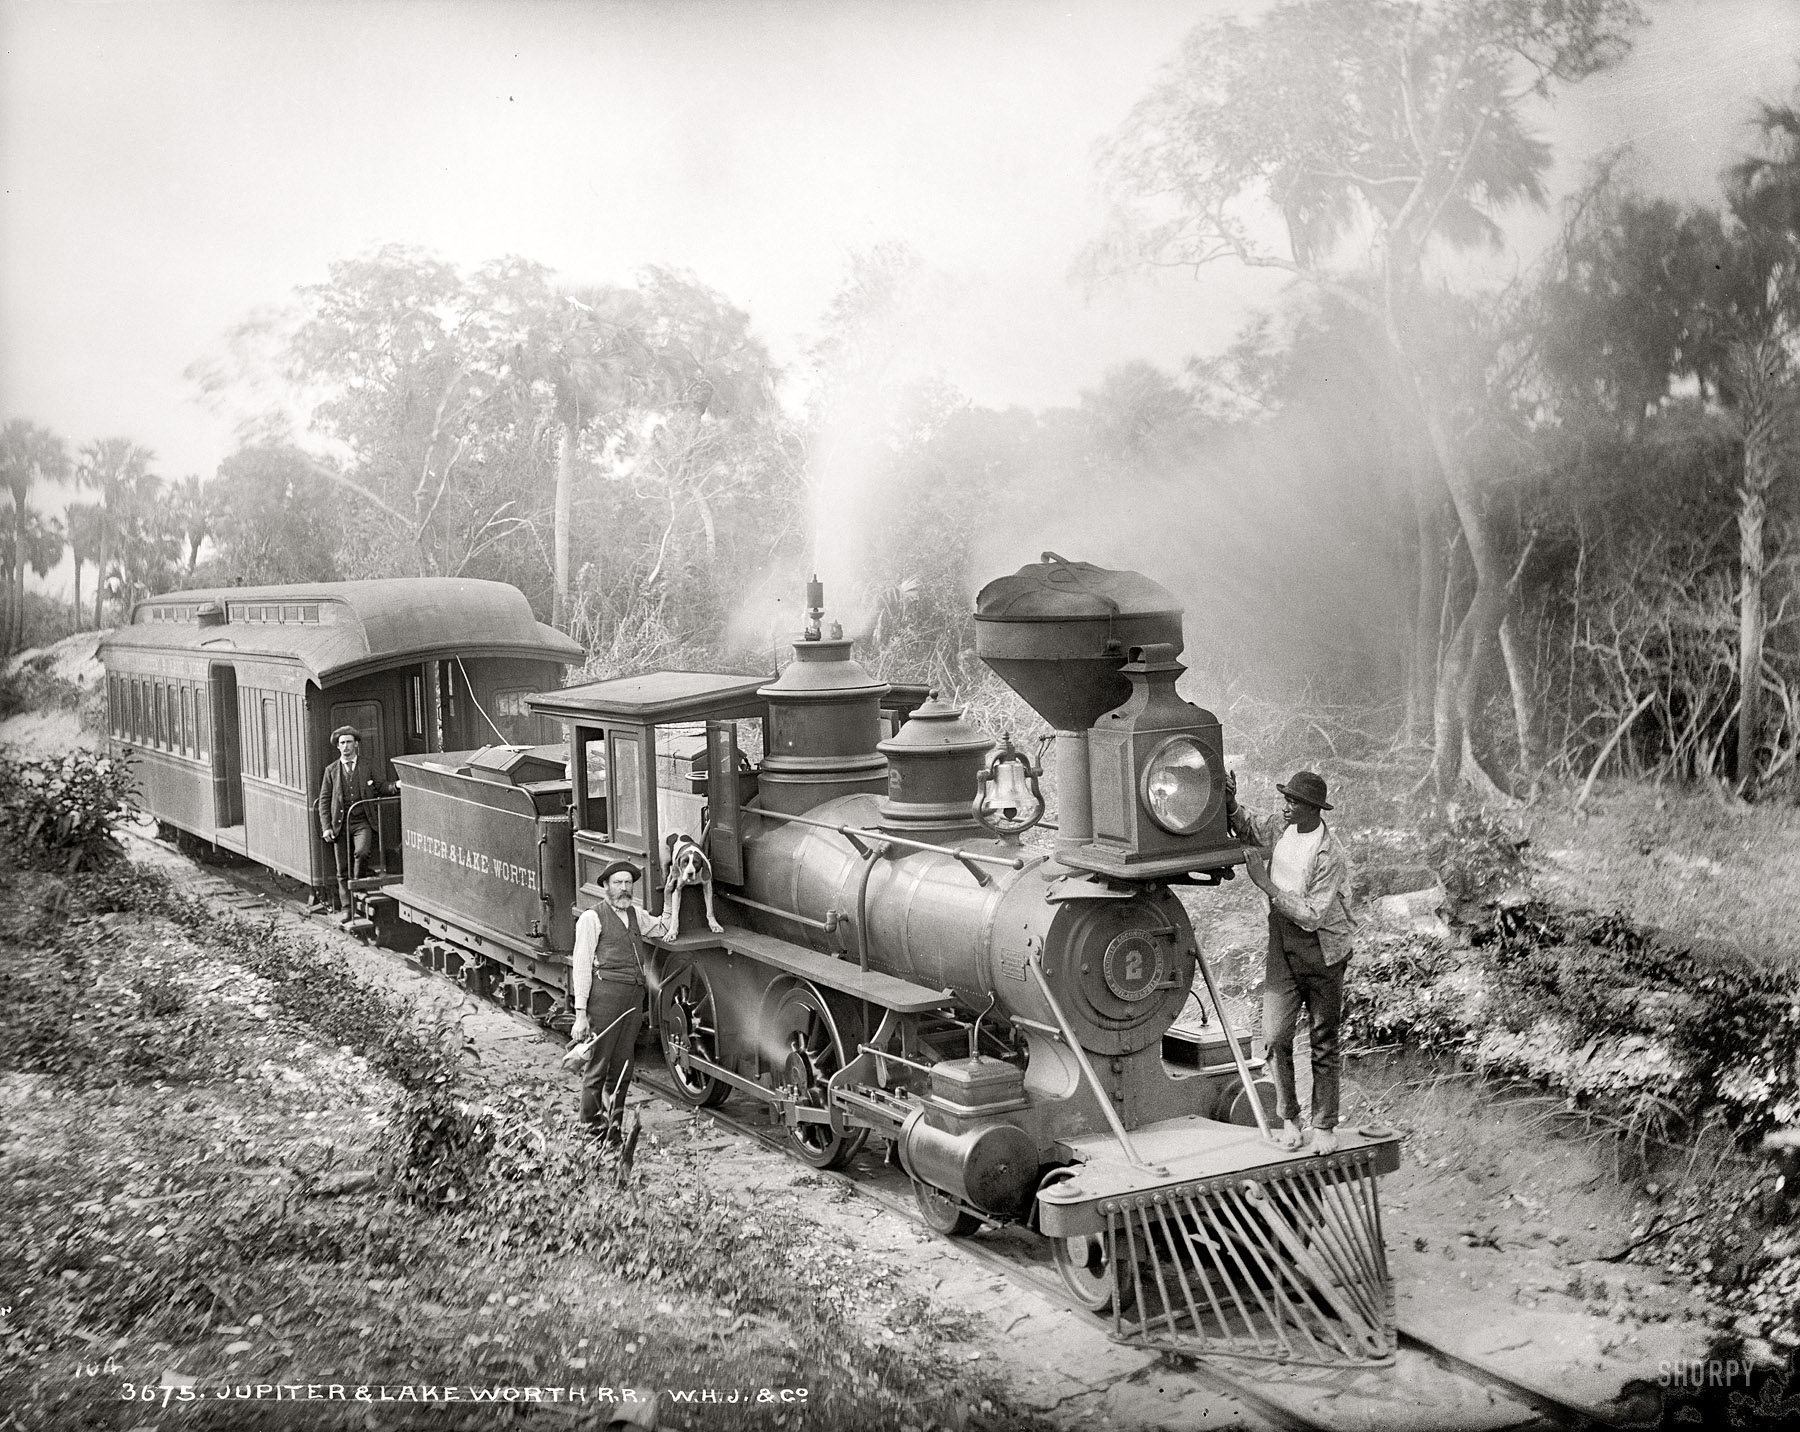 Florida circa 1896. "Jupiter & Lake Worth R.R." And one hound dog who didn't have to wait for the invention of the pickup truck. Dry plate glass negative by William Henry Jackson. Detroit Publishing Company. View full size.